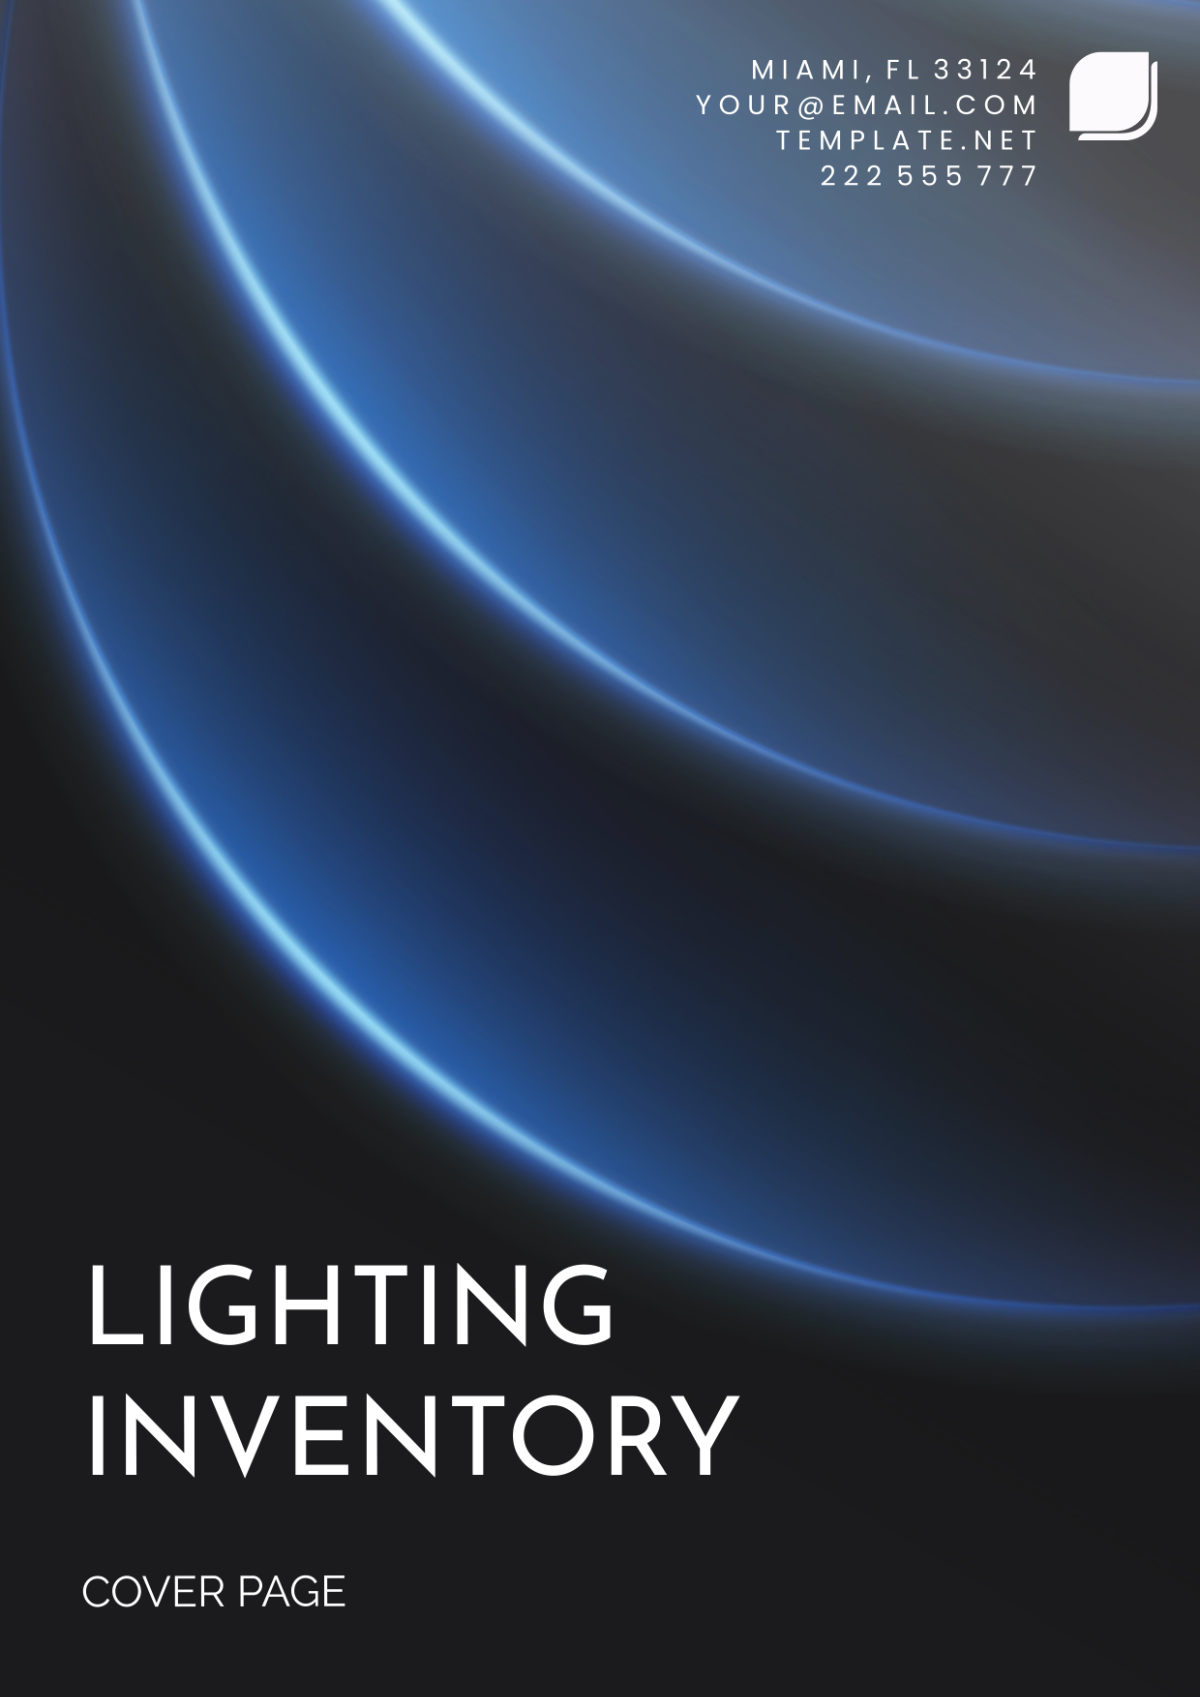 Lighting Inventory Cover Page